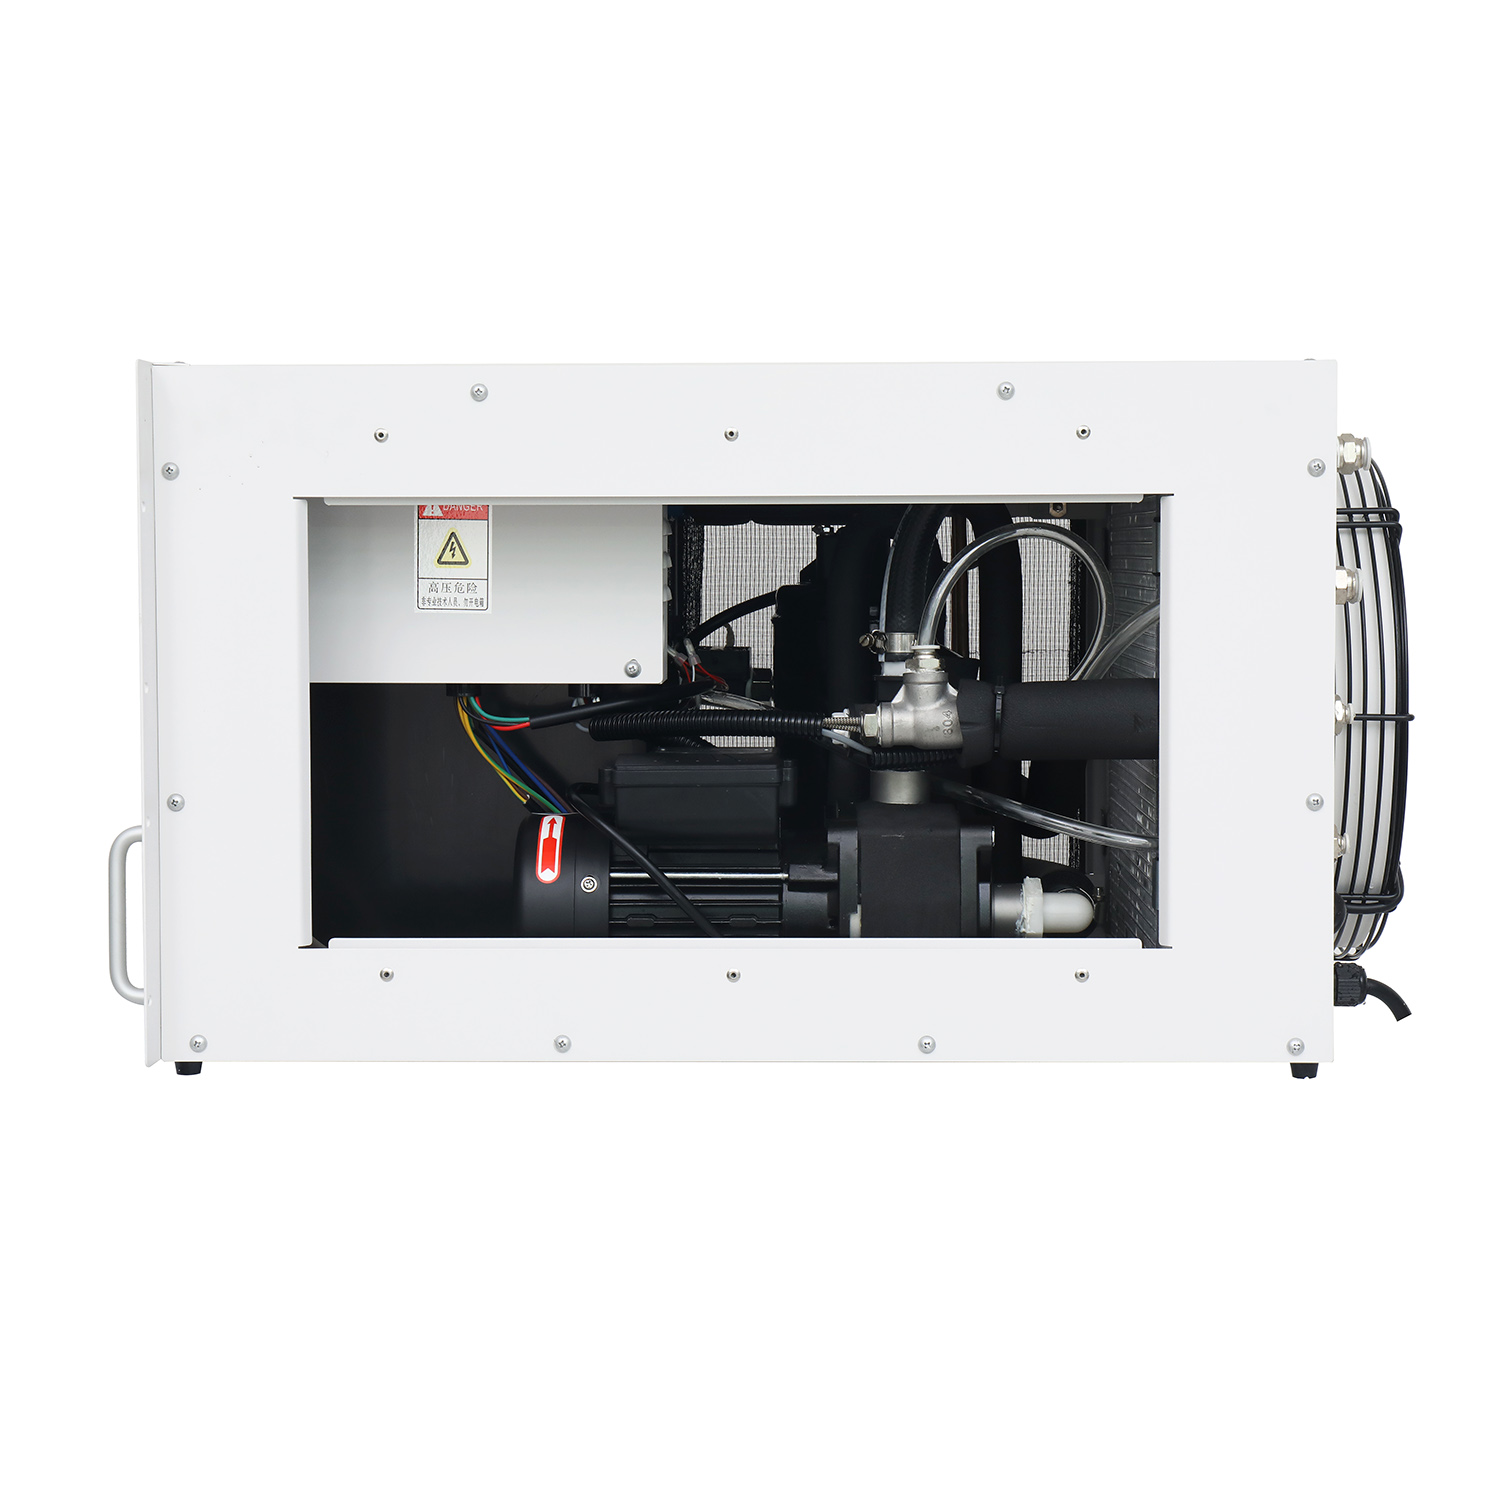 Build-in Cabinet Chiller